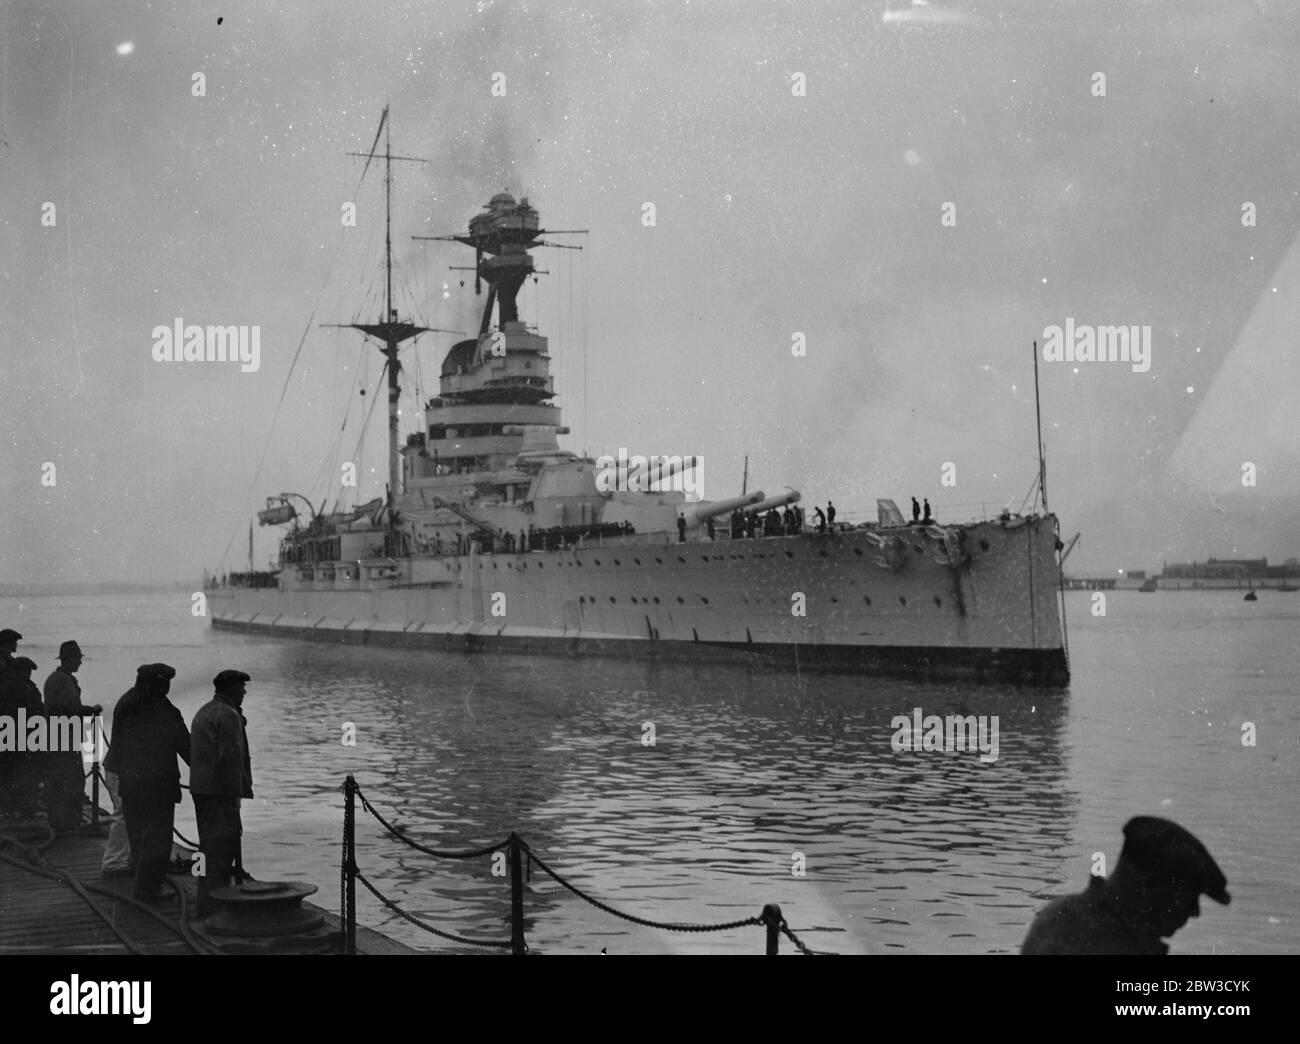 Battleship home from the mediterranean . Sailors will spend christmas in England . the 29 , 150 ton battleship HMS Resolution (pennant number 09 ) arrived at Porstmouth from Alexandria after having completed more than two years service on the Mediterranean station . Many sailors from other warships were aboard her as well as her own crew so that they could spend christmas at home . The HMS Resolution bes been relieved by HMS Ramillies ( 07 ) which is of similar class and tonnage . Photo shows , HMS Resolution arriving at Portsmouth . 5 November 1935 Stock Photo